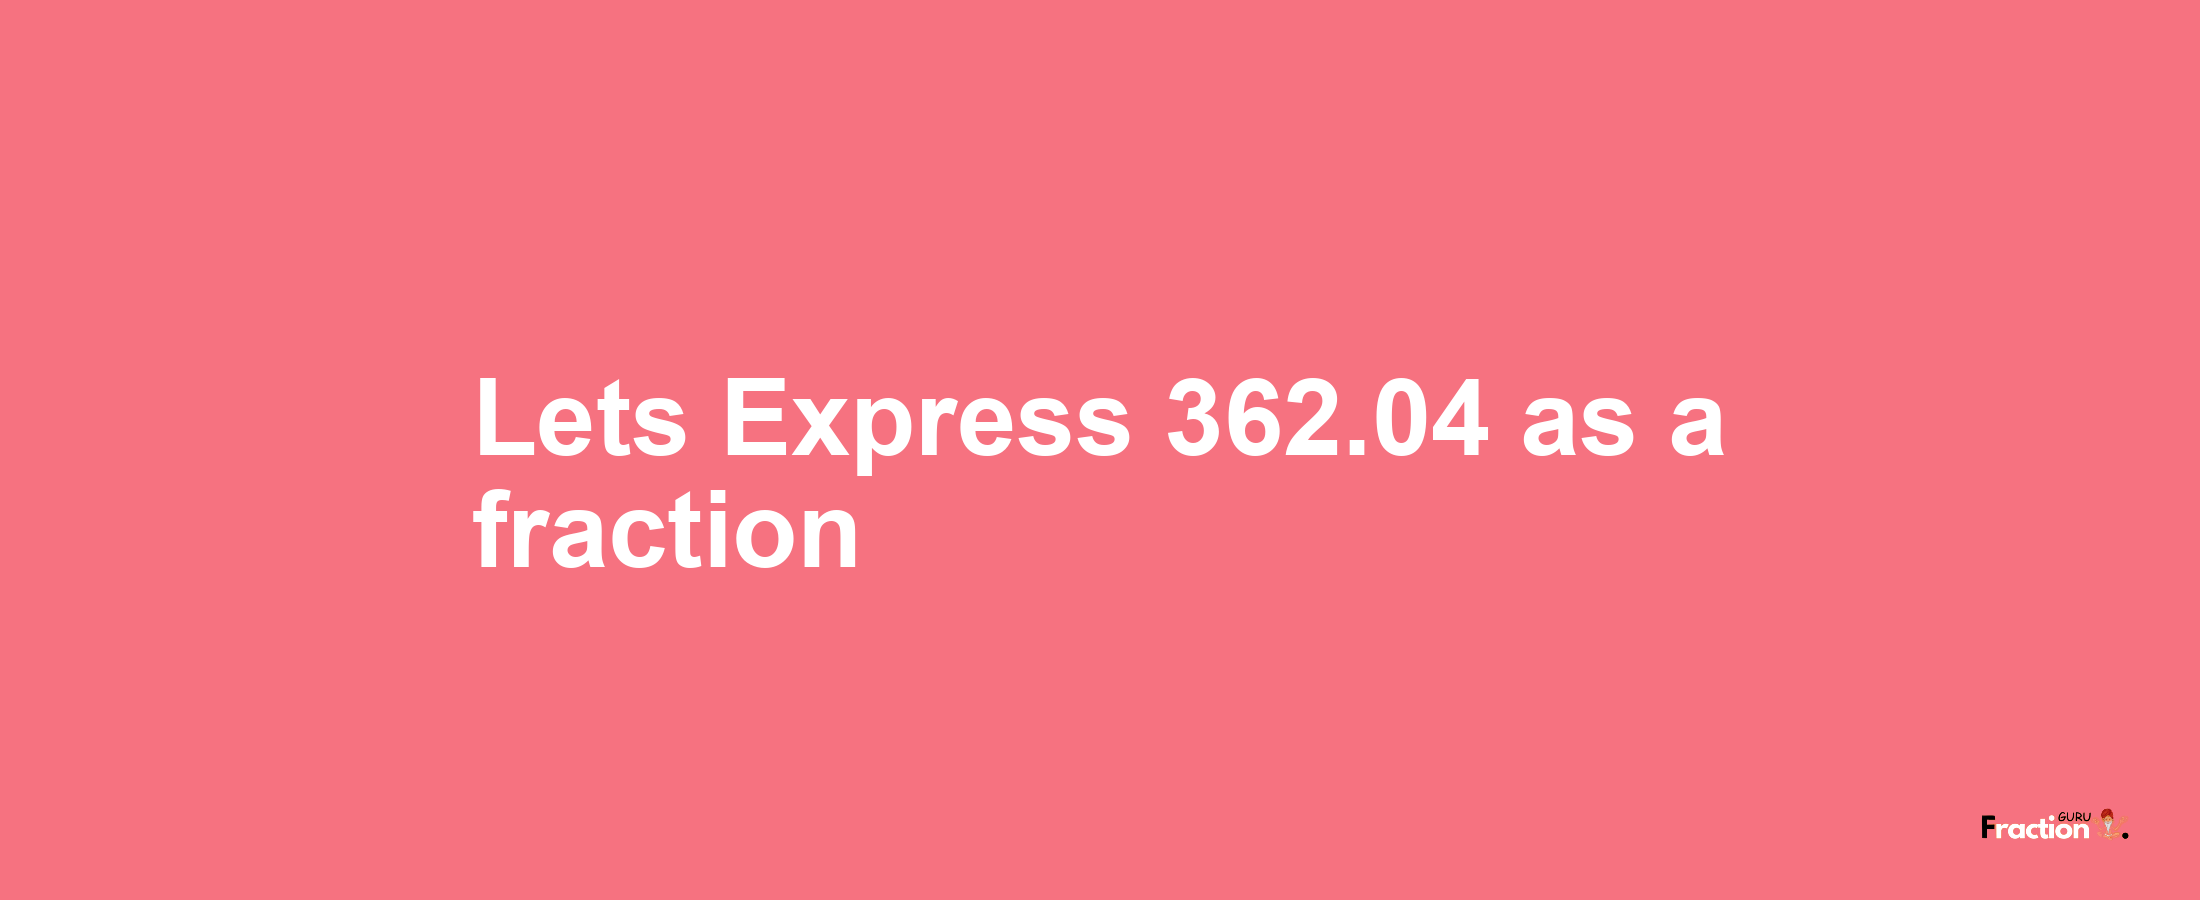 Lets Express 362.04 as afraction